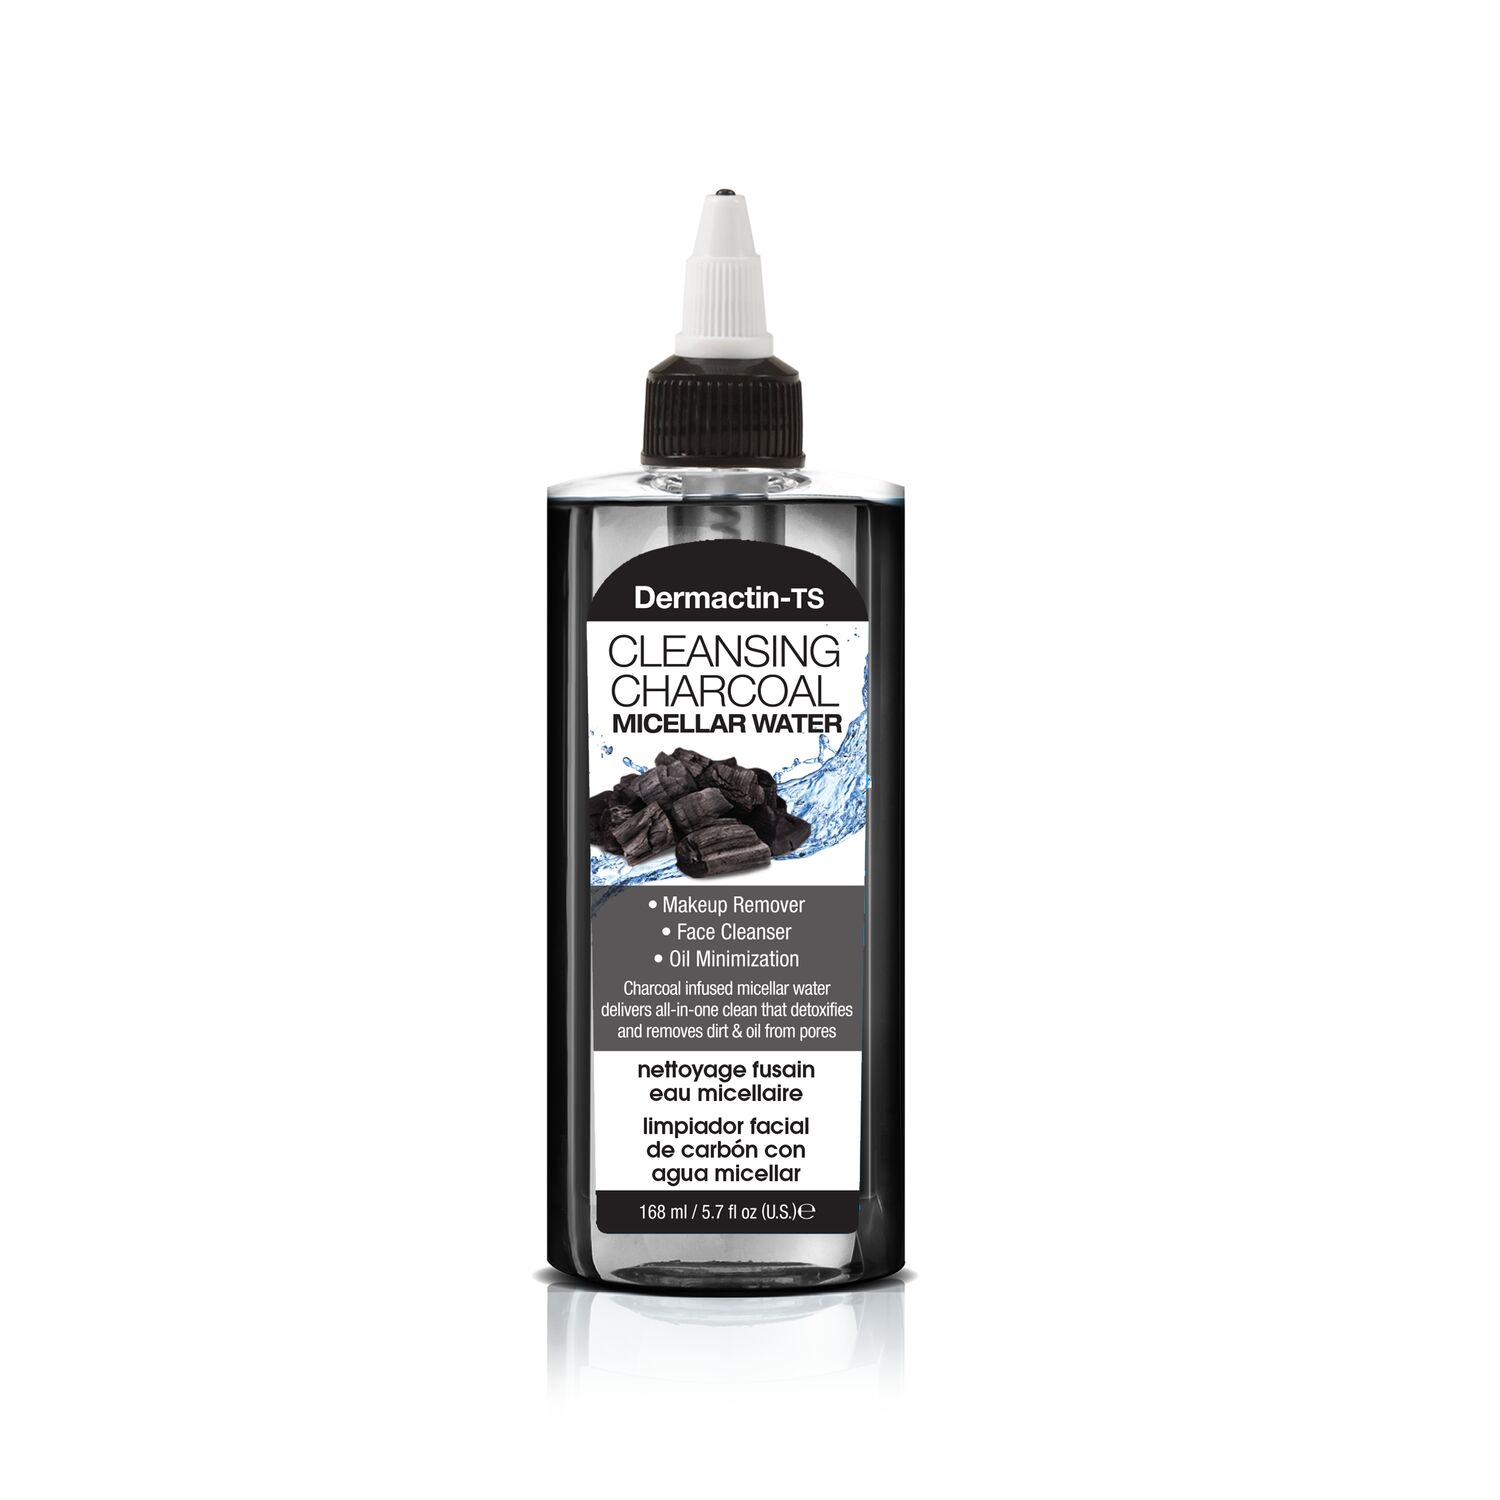 picture of Dermactin-TS Facial Cleanser Charcoal Micellar Water